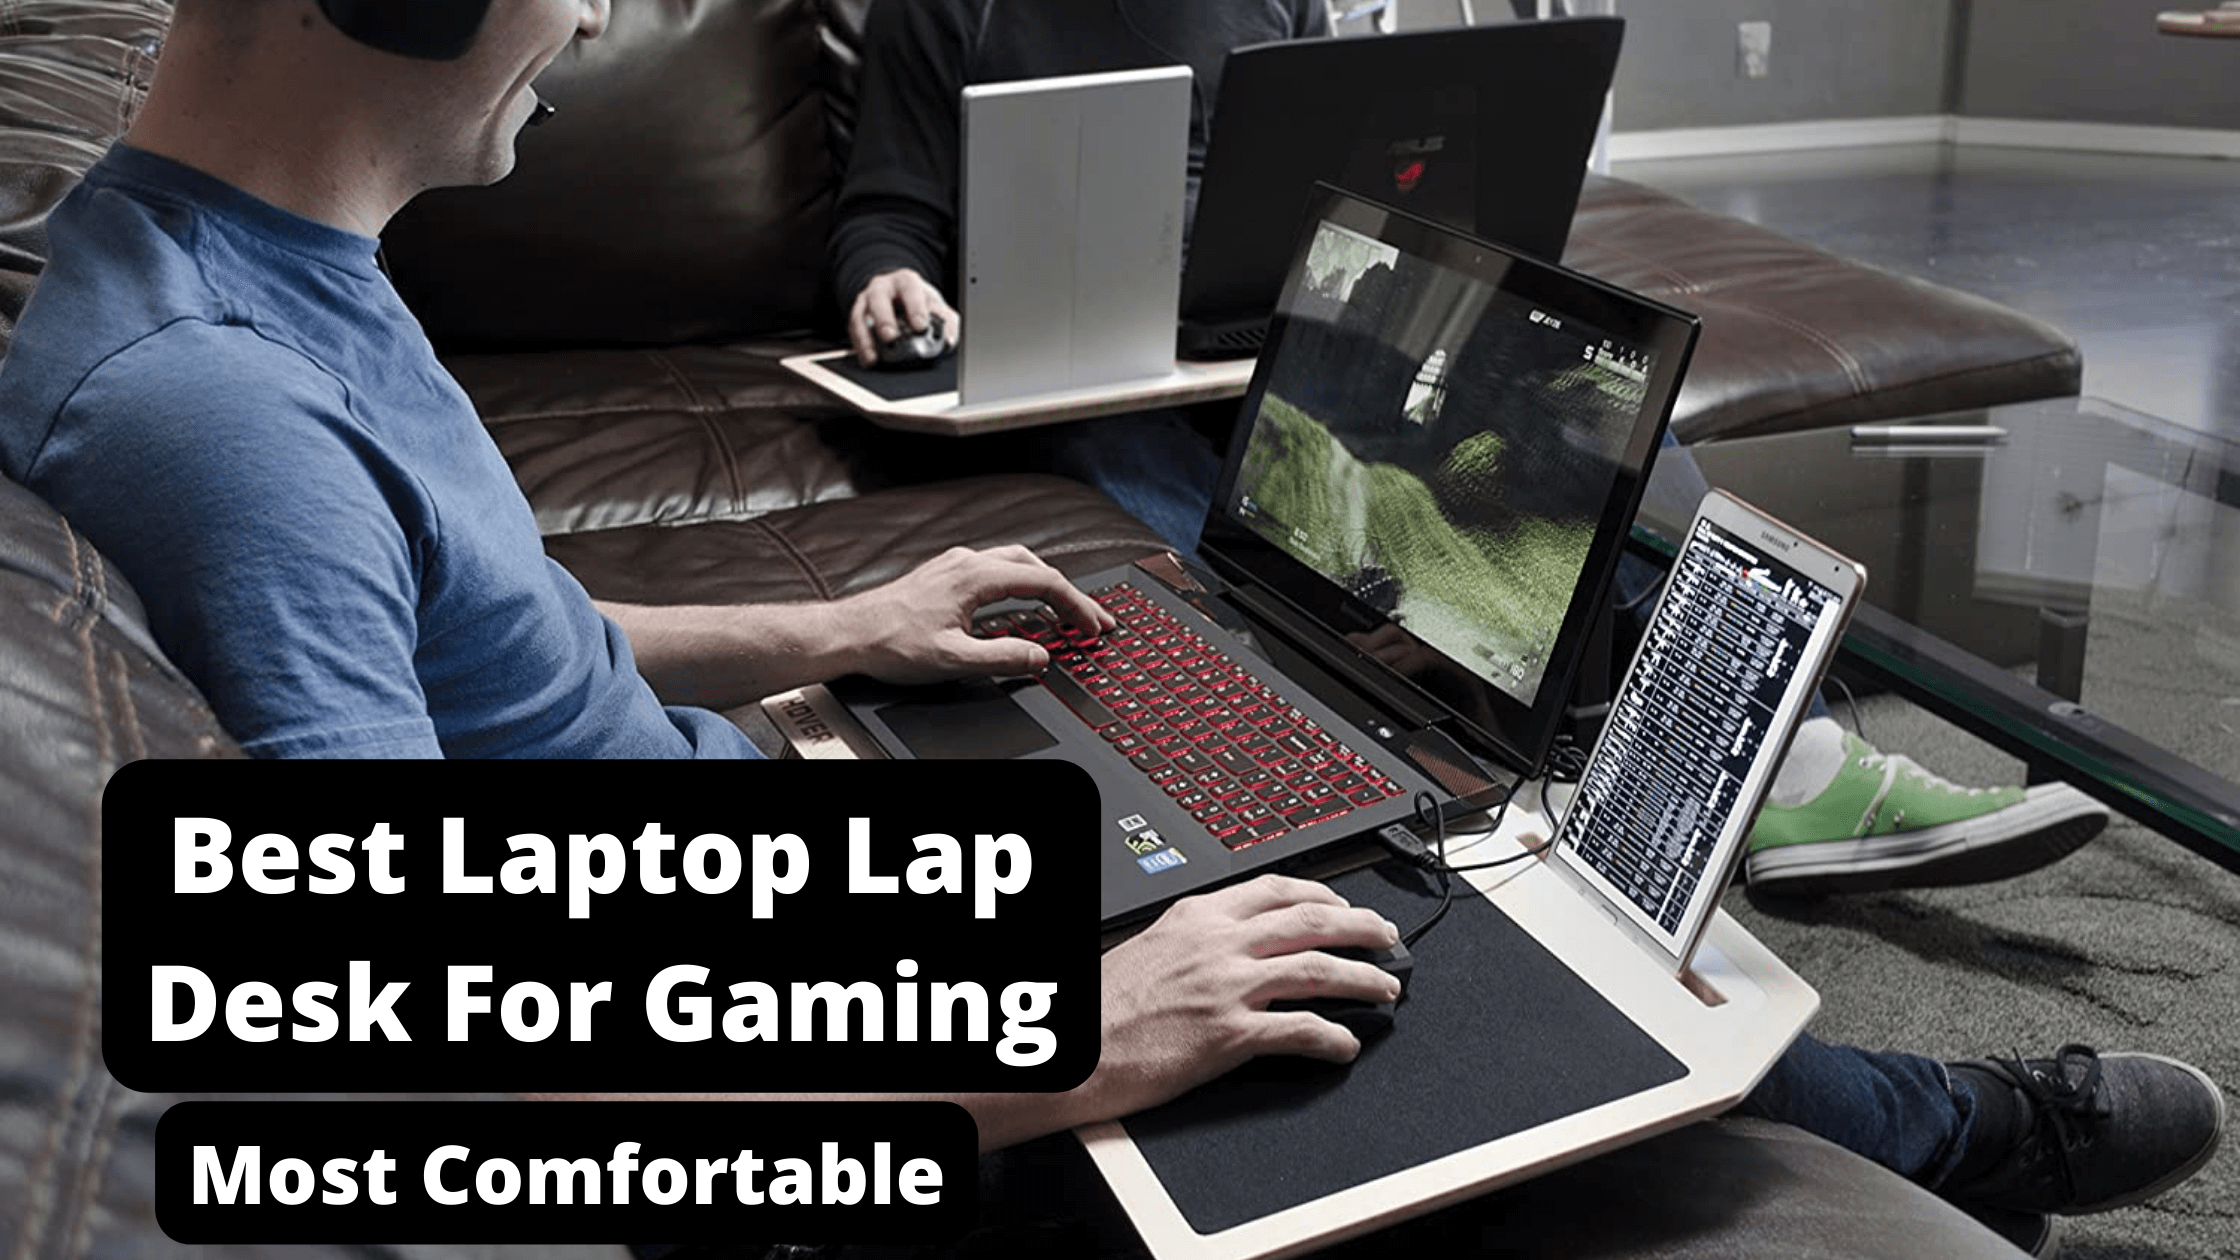 Best Laptop Lap Desk For Gaming [25 Reviewed] - Most Comfortable